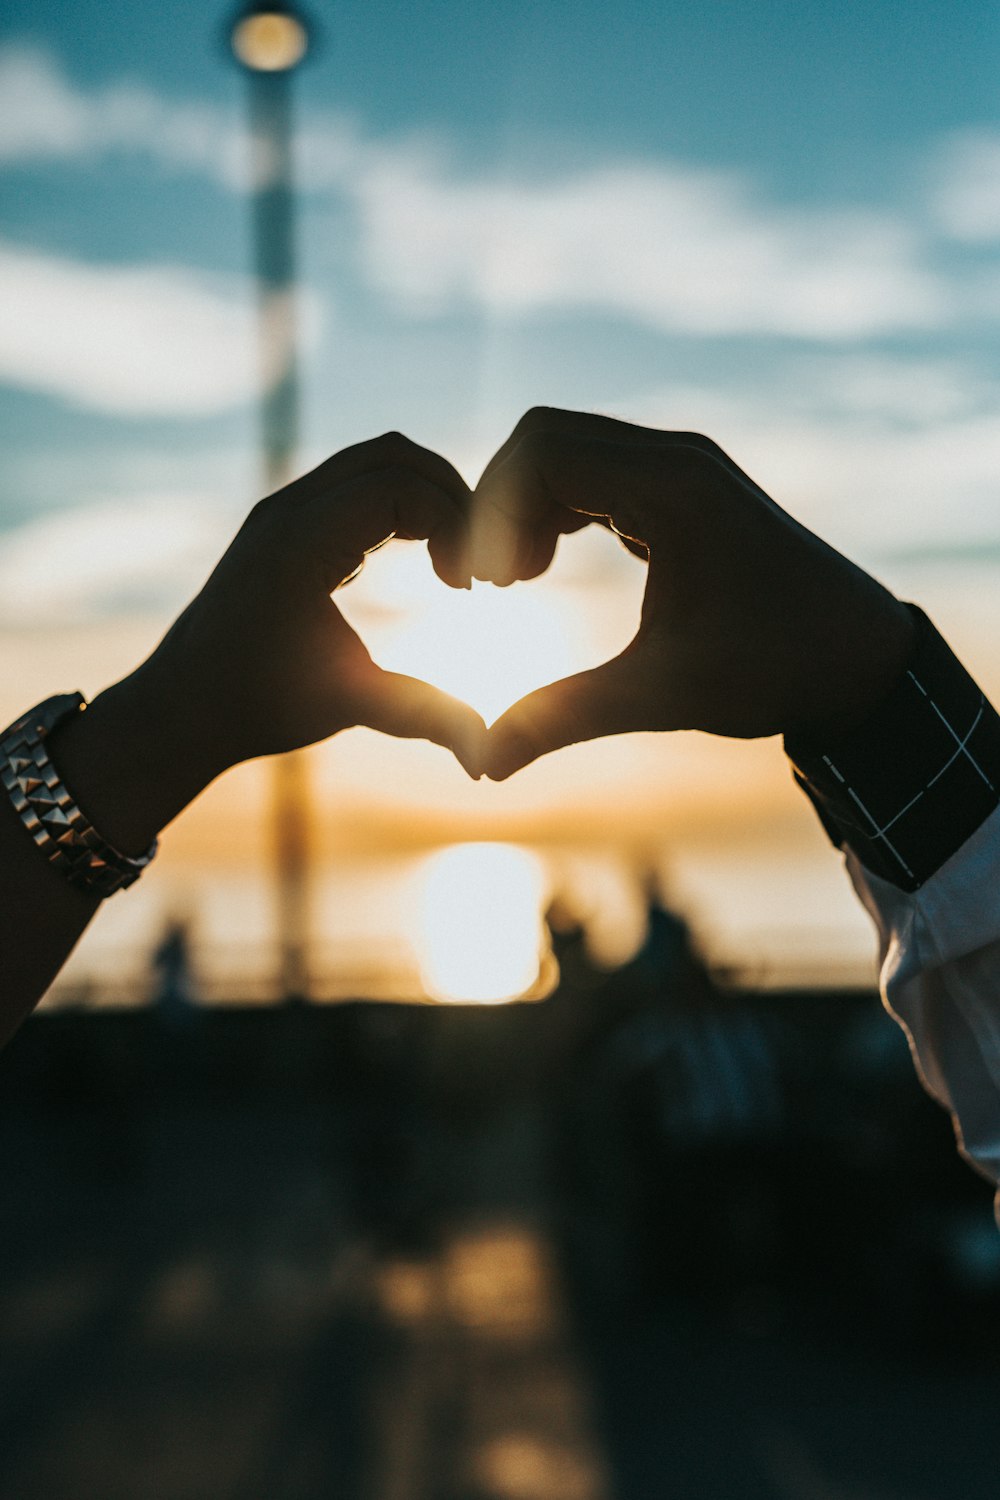 750+ Love Story Pictures & Images | Download Free Images & Stock Photos on  Unsplash